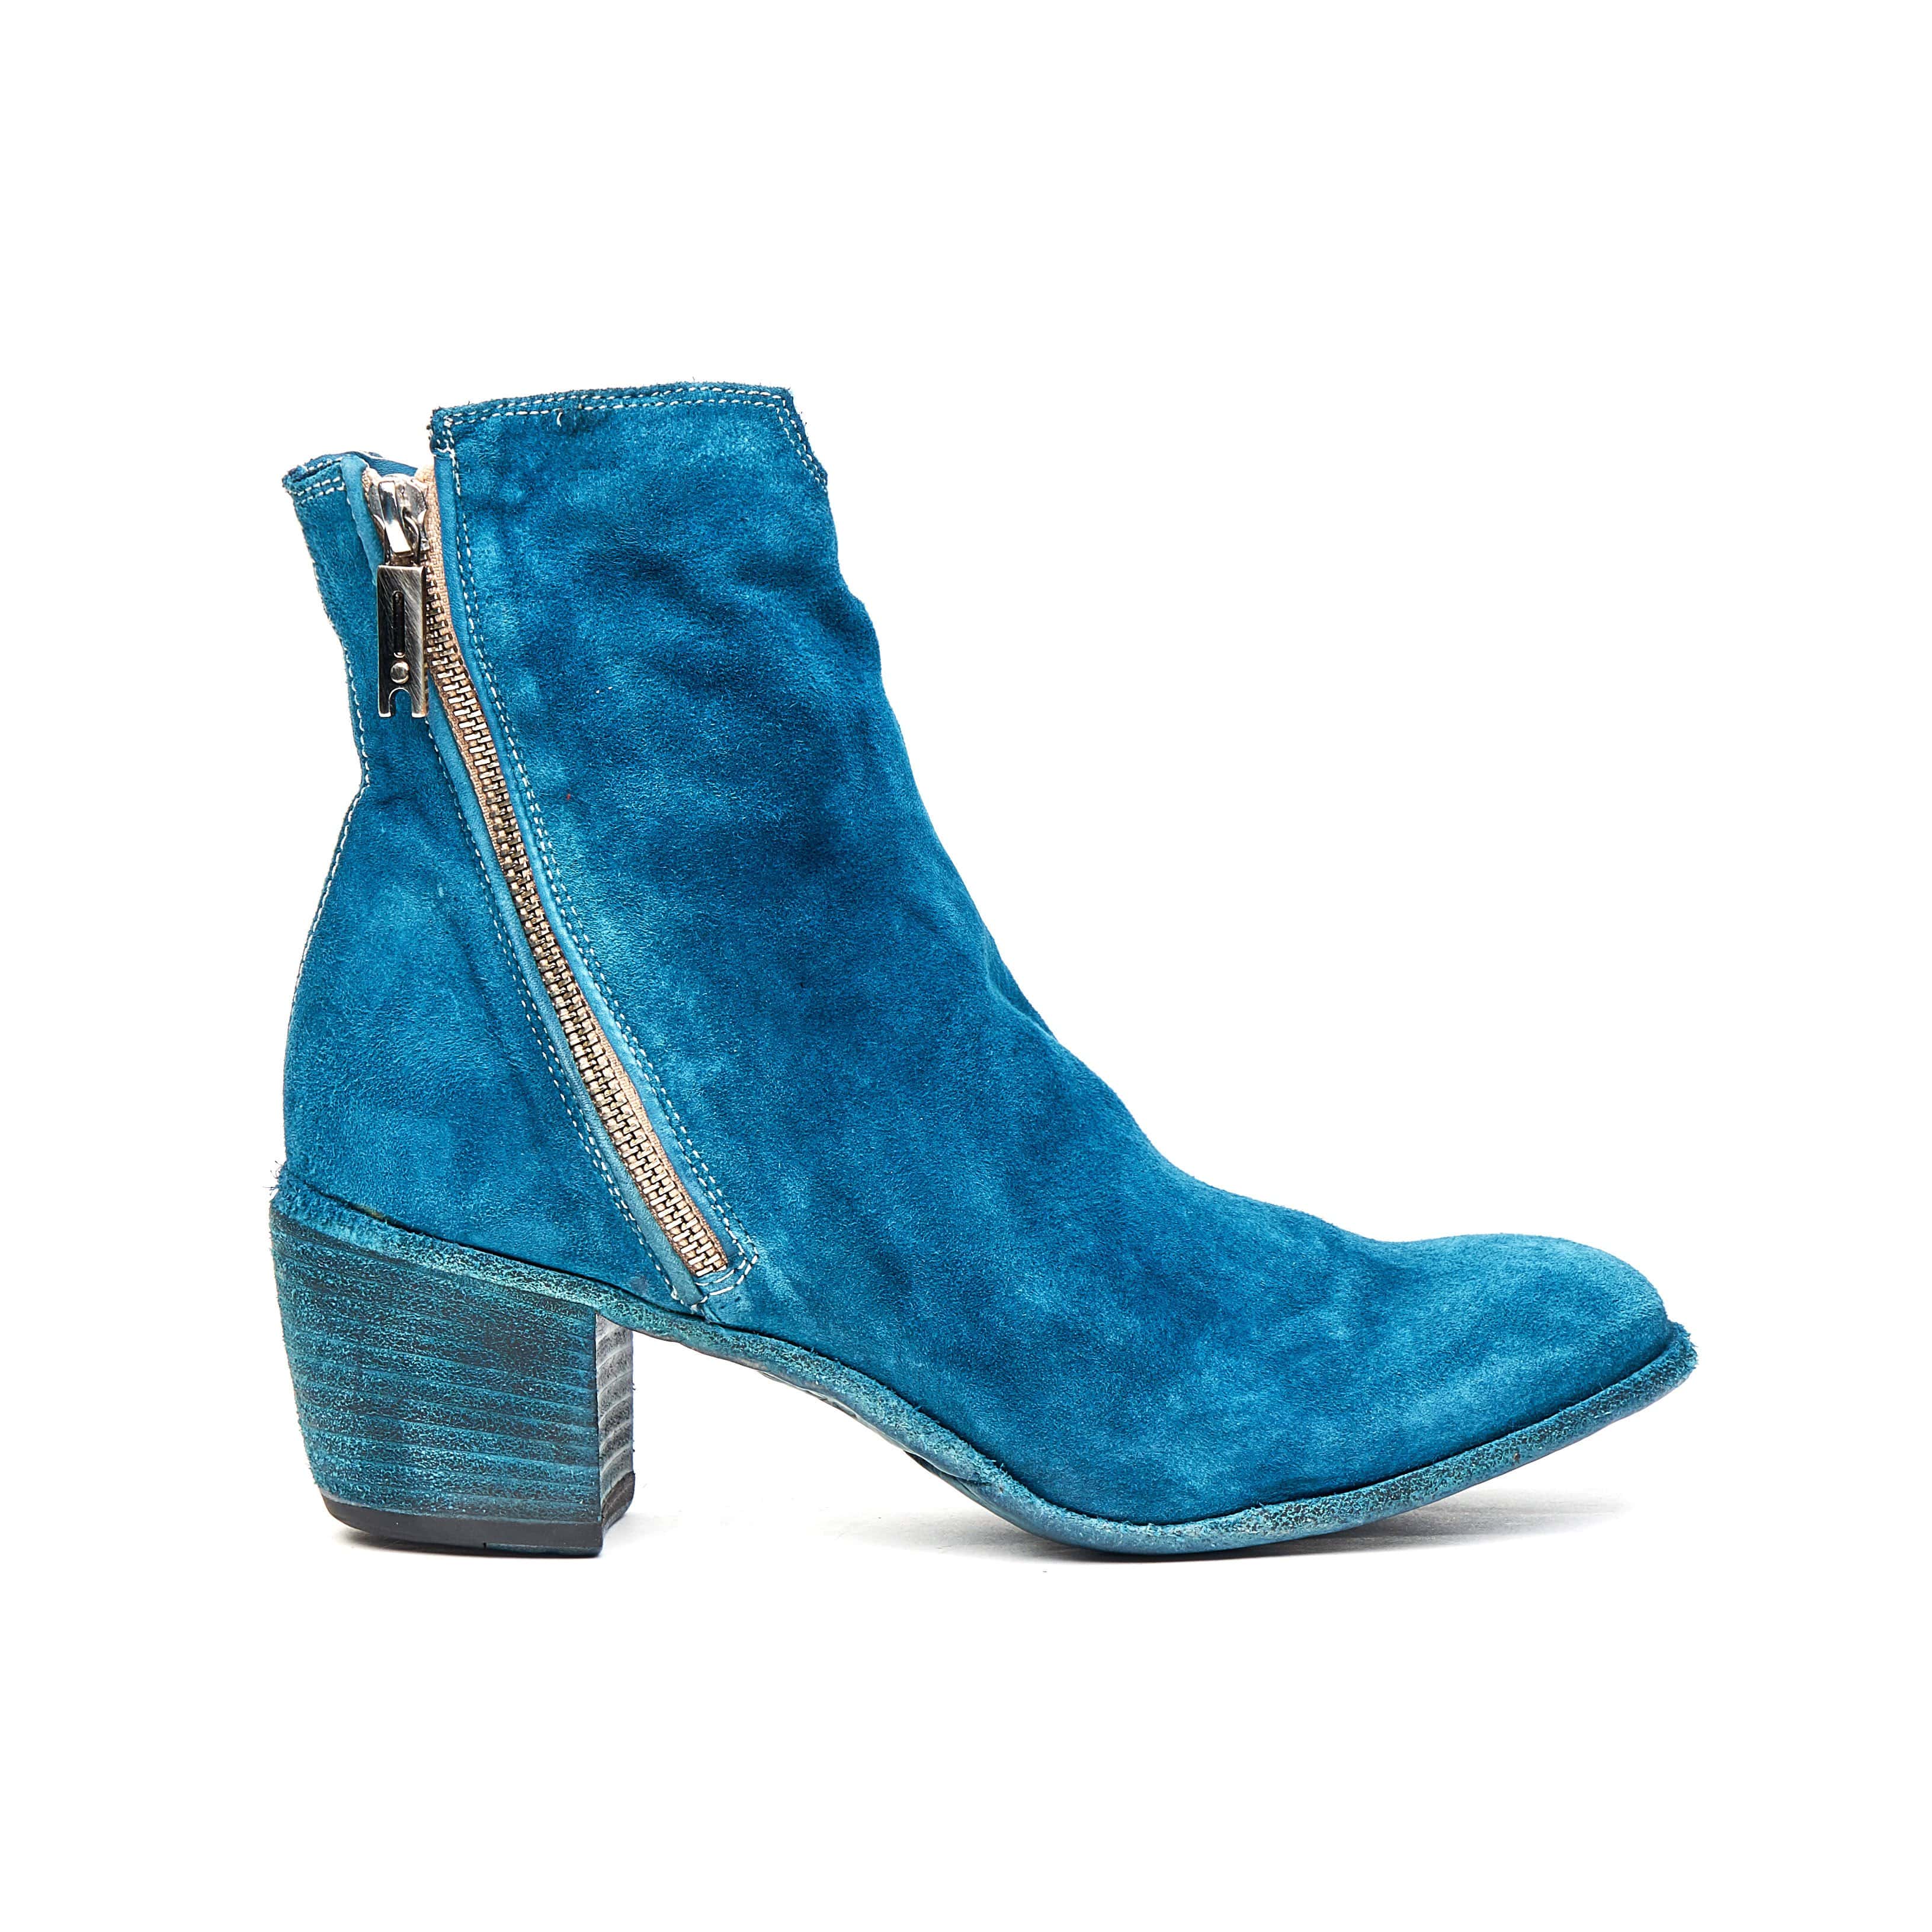 Women's Ankle Boots - Buy Exclusive Women's Ankle Boots Online – 124 Shoes